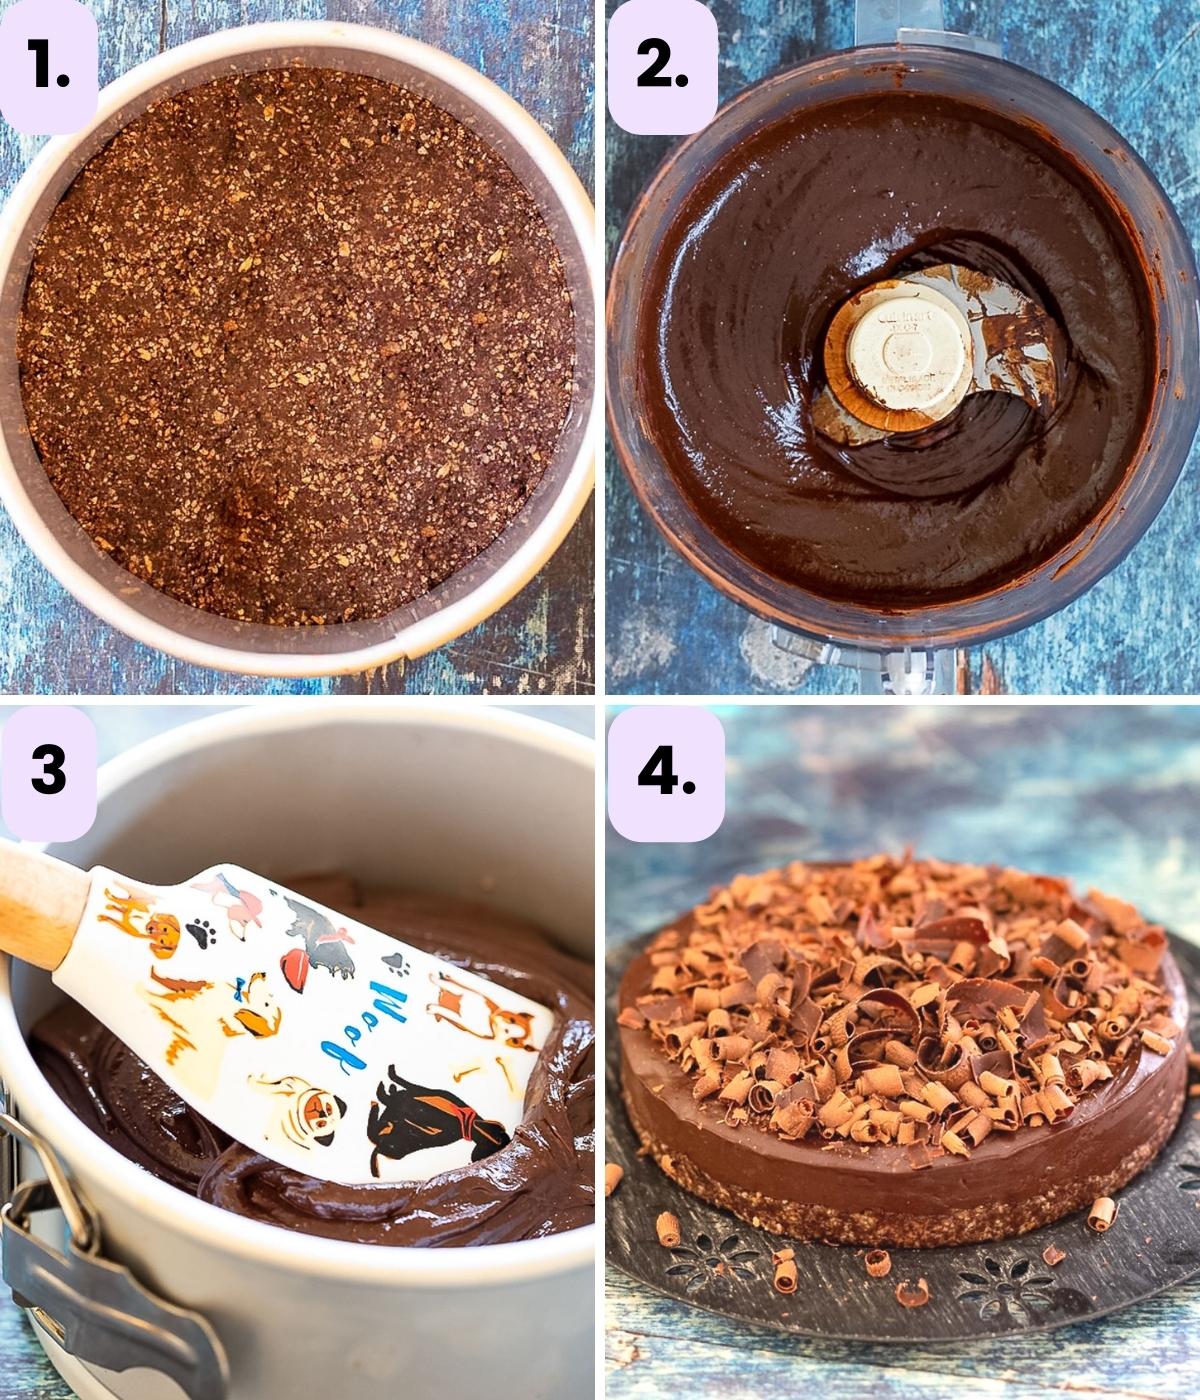 step by step photos showing how to make this recipe (as per the written instructions)